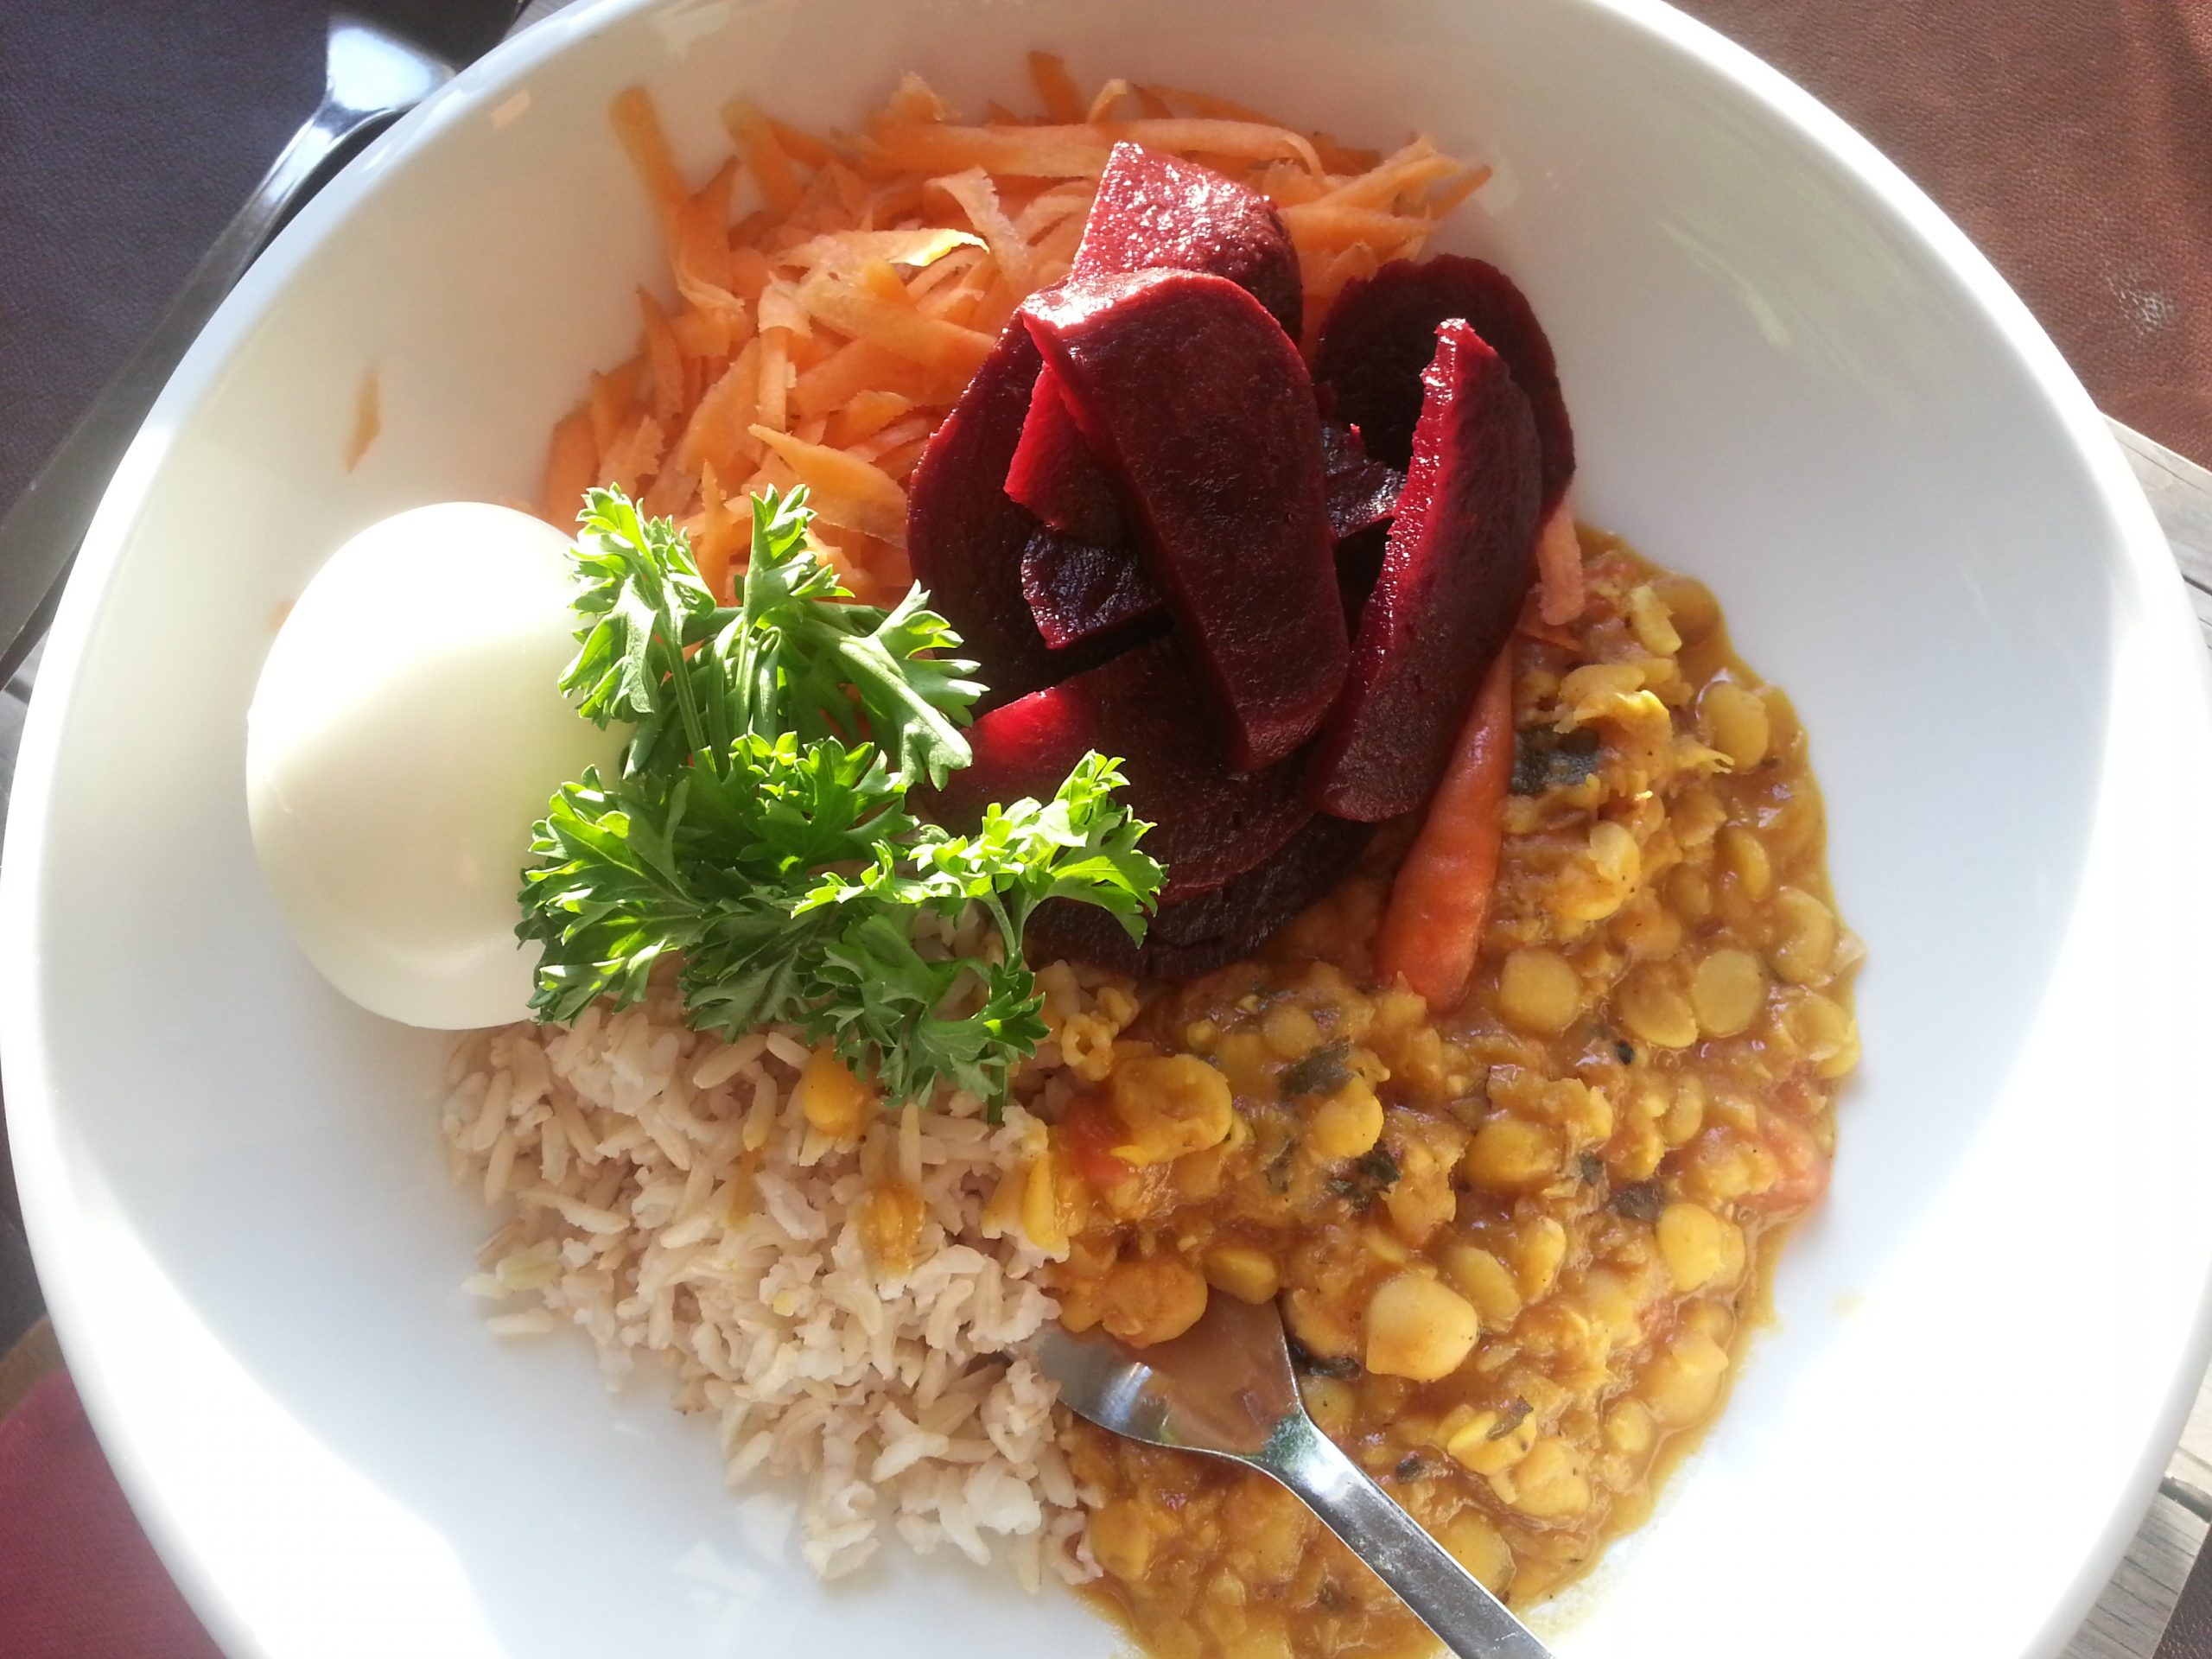 Yoga for Blokes Egg, beetroot, daal, rice, carrot, parsley